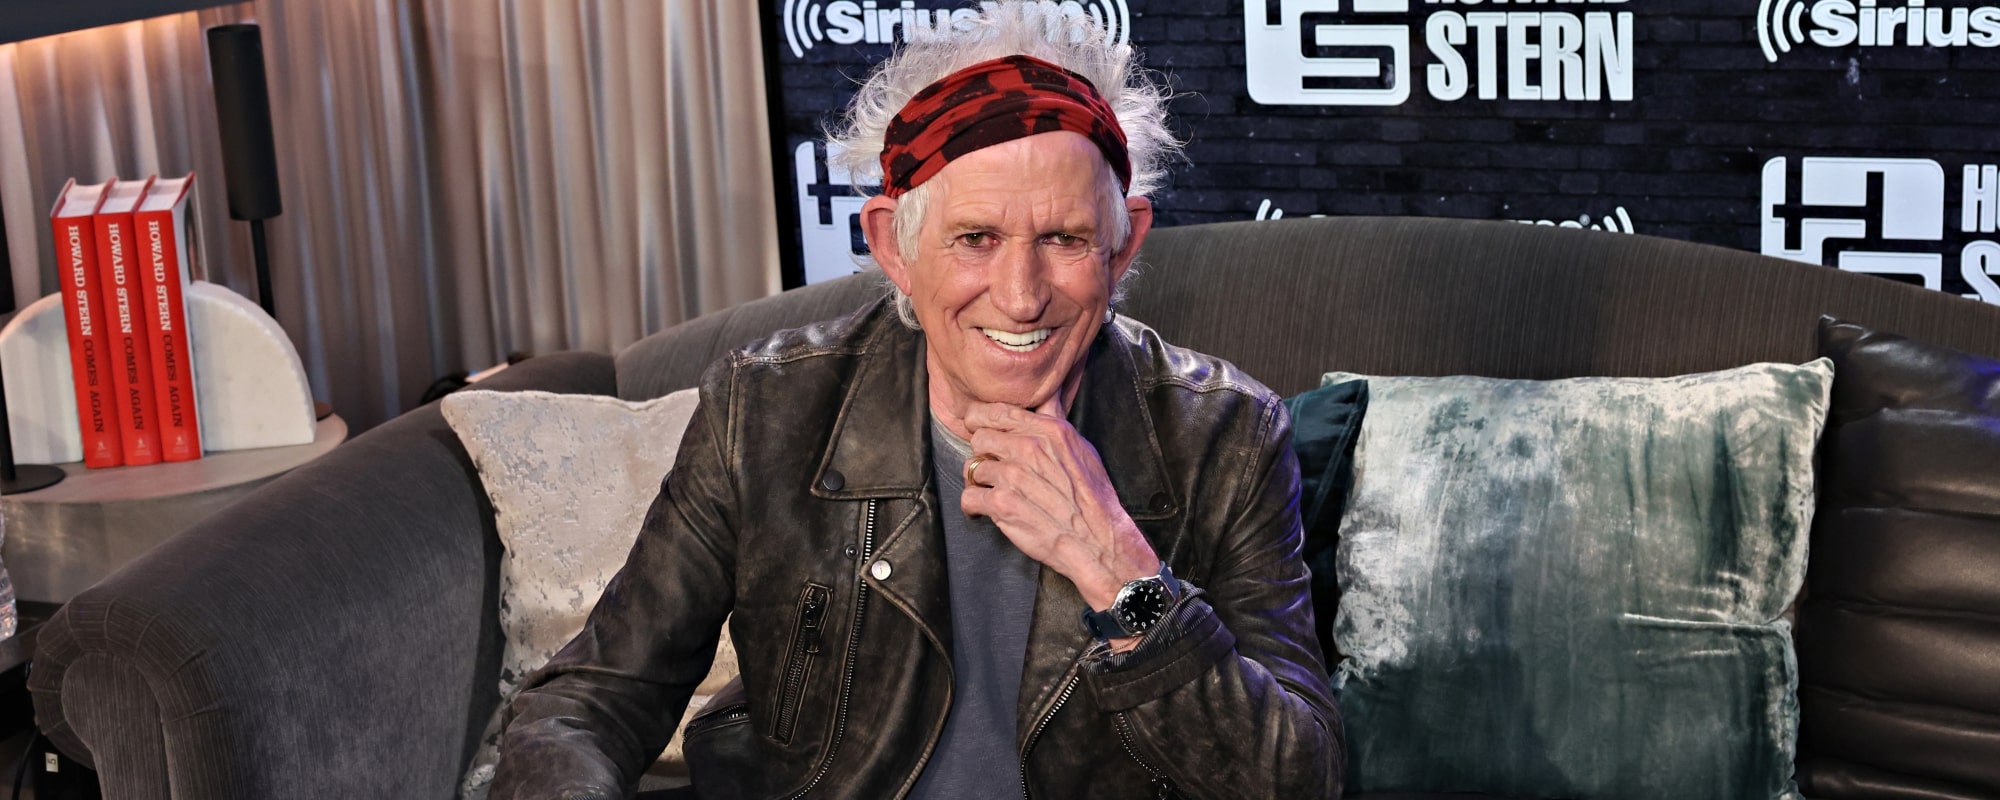 Keith Richards Discusses Marriage with Patti Hansen and How His Children Inspired “Wild Horses” and “Angie”